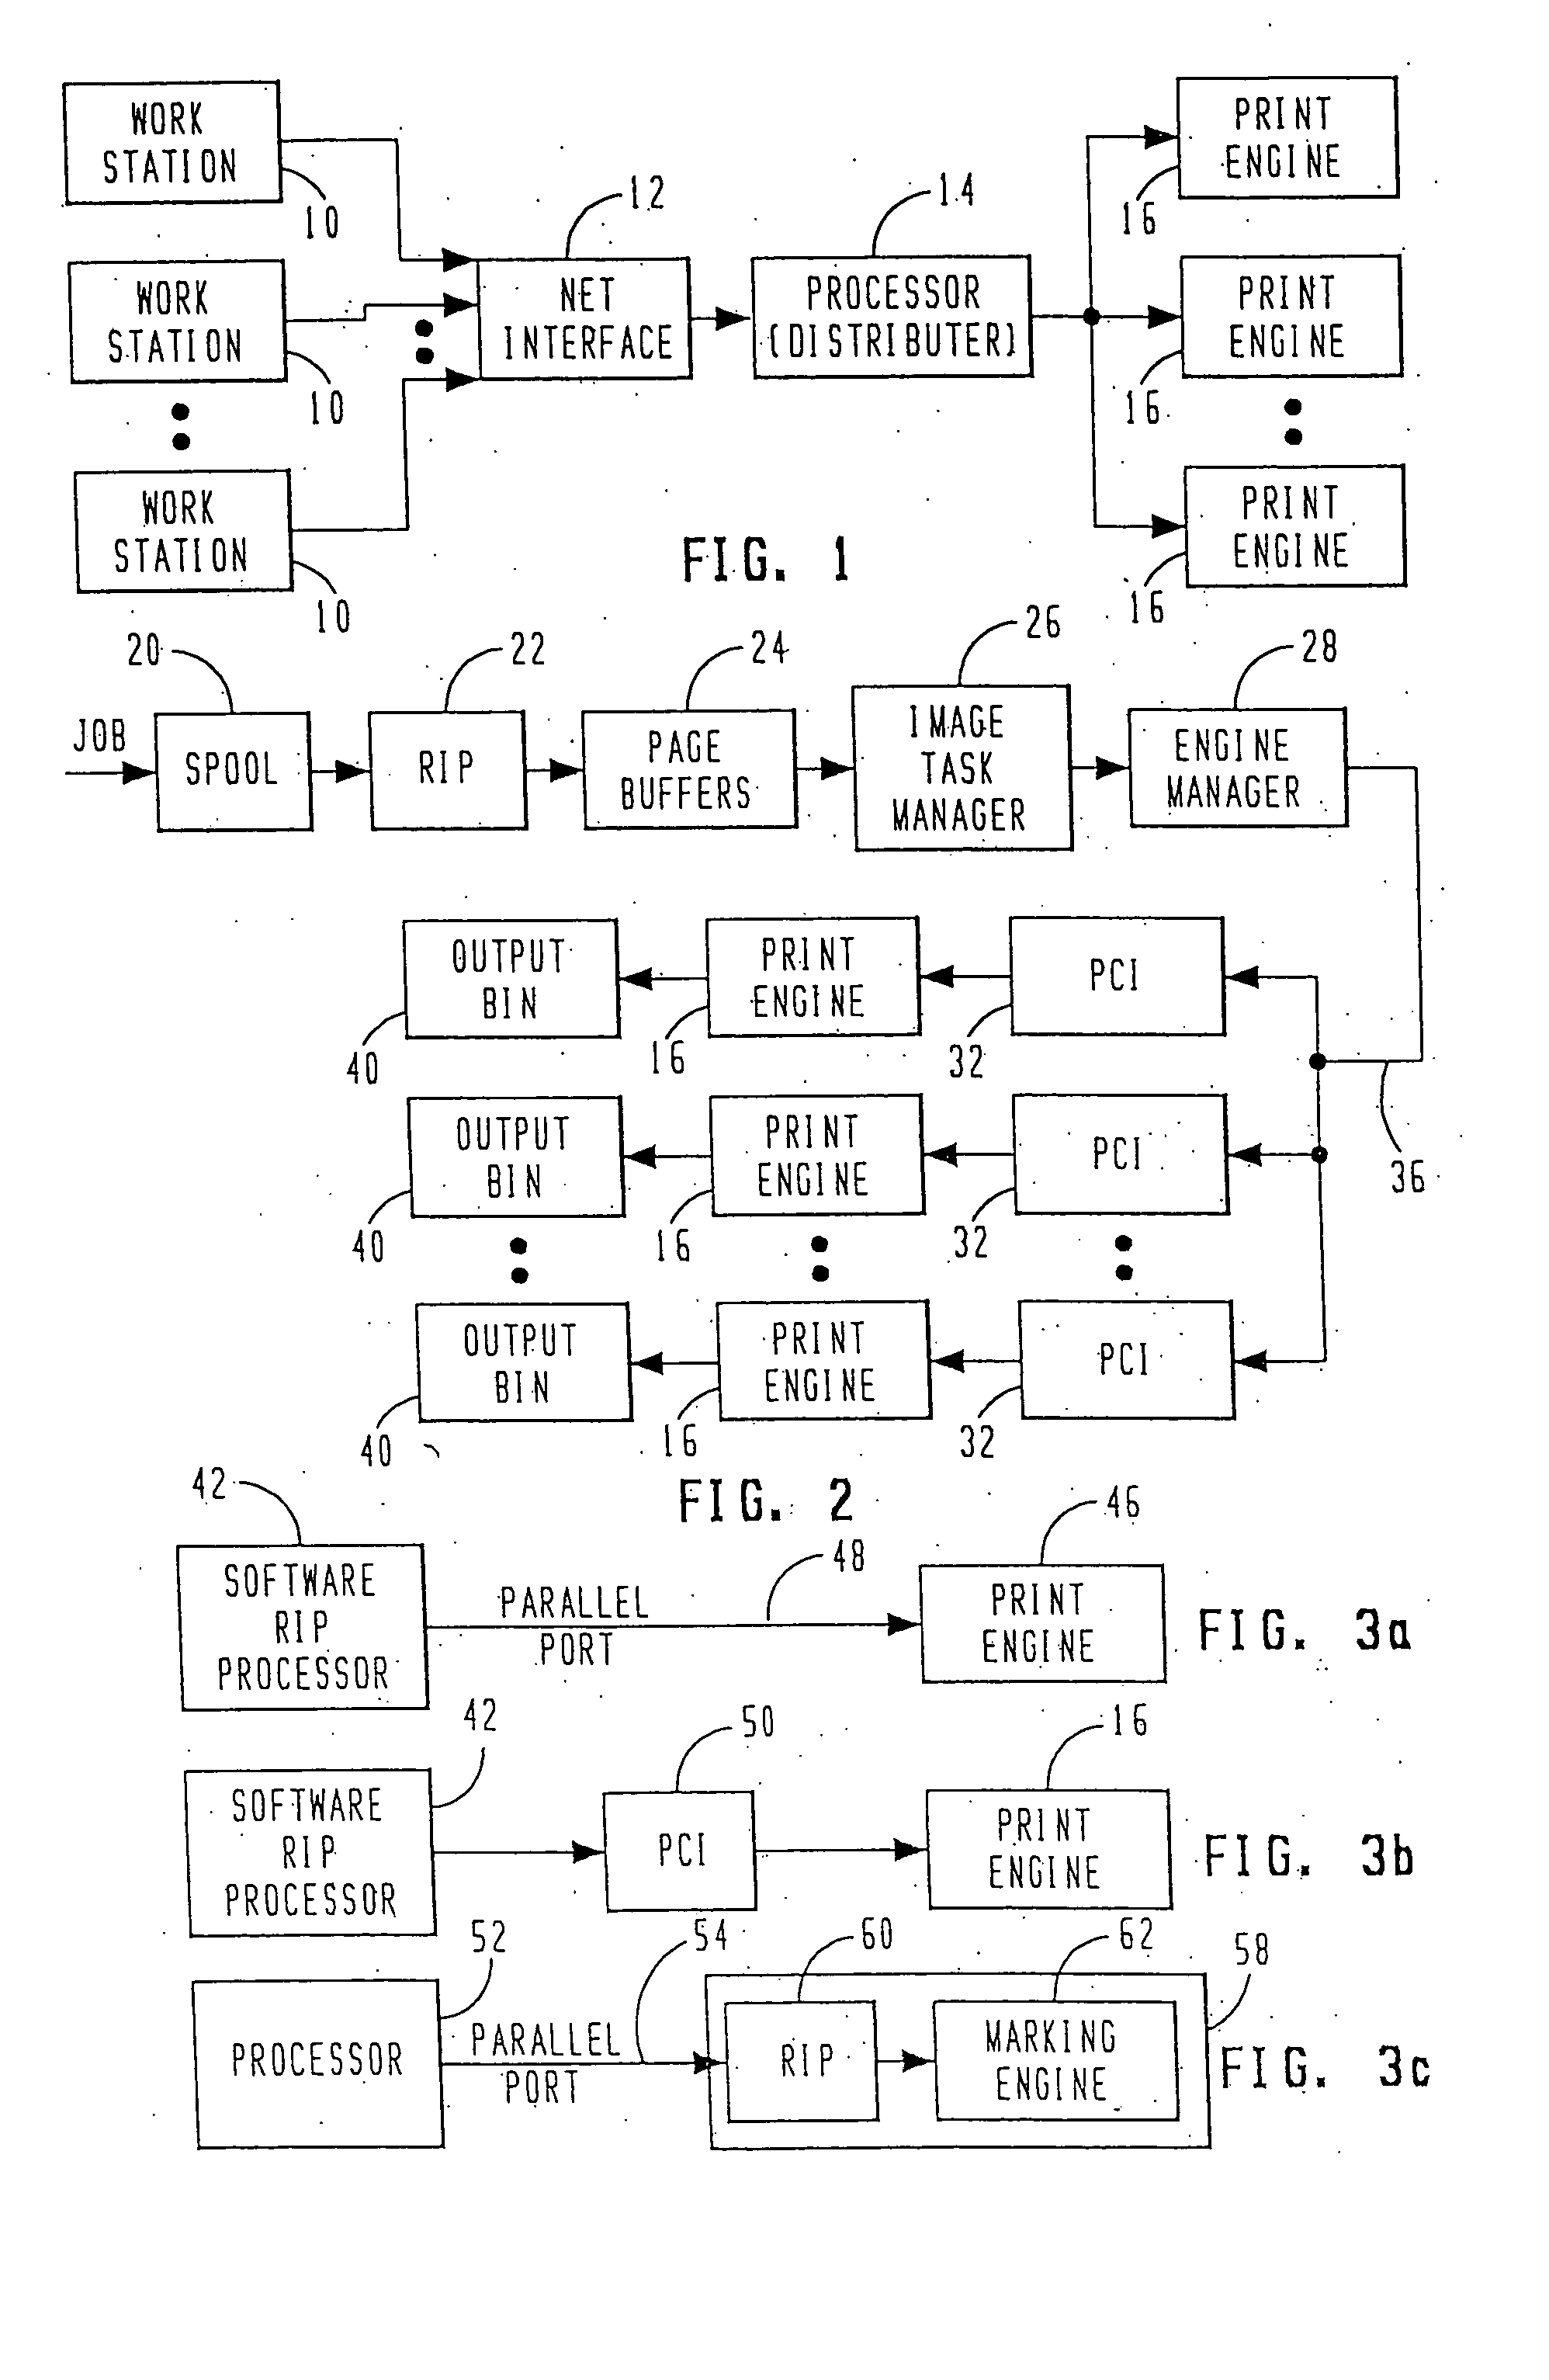 Method and apparatus for determining toner level in electrophotographic print engines